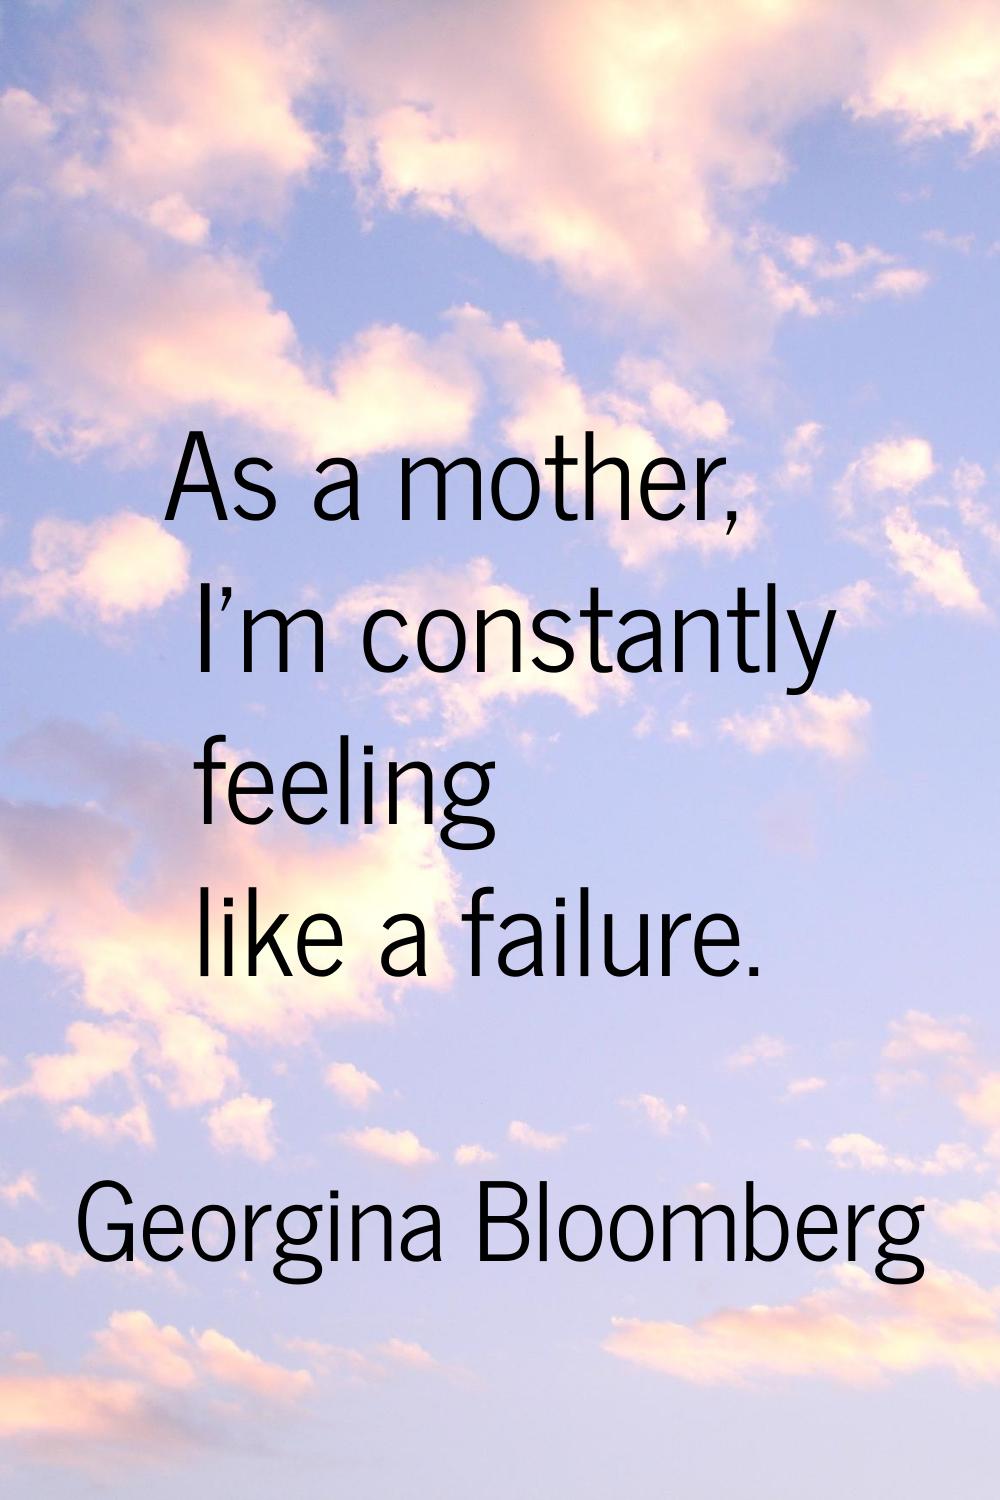 As a mother, I'm constantly feeling like a failure.